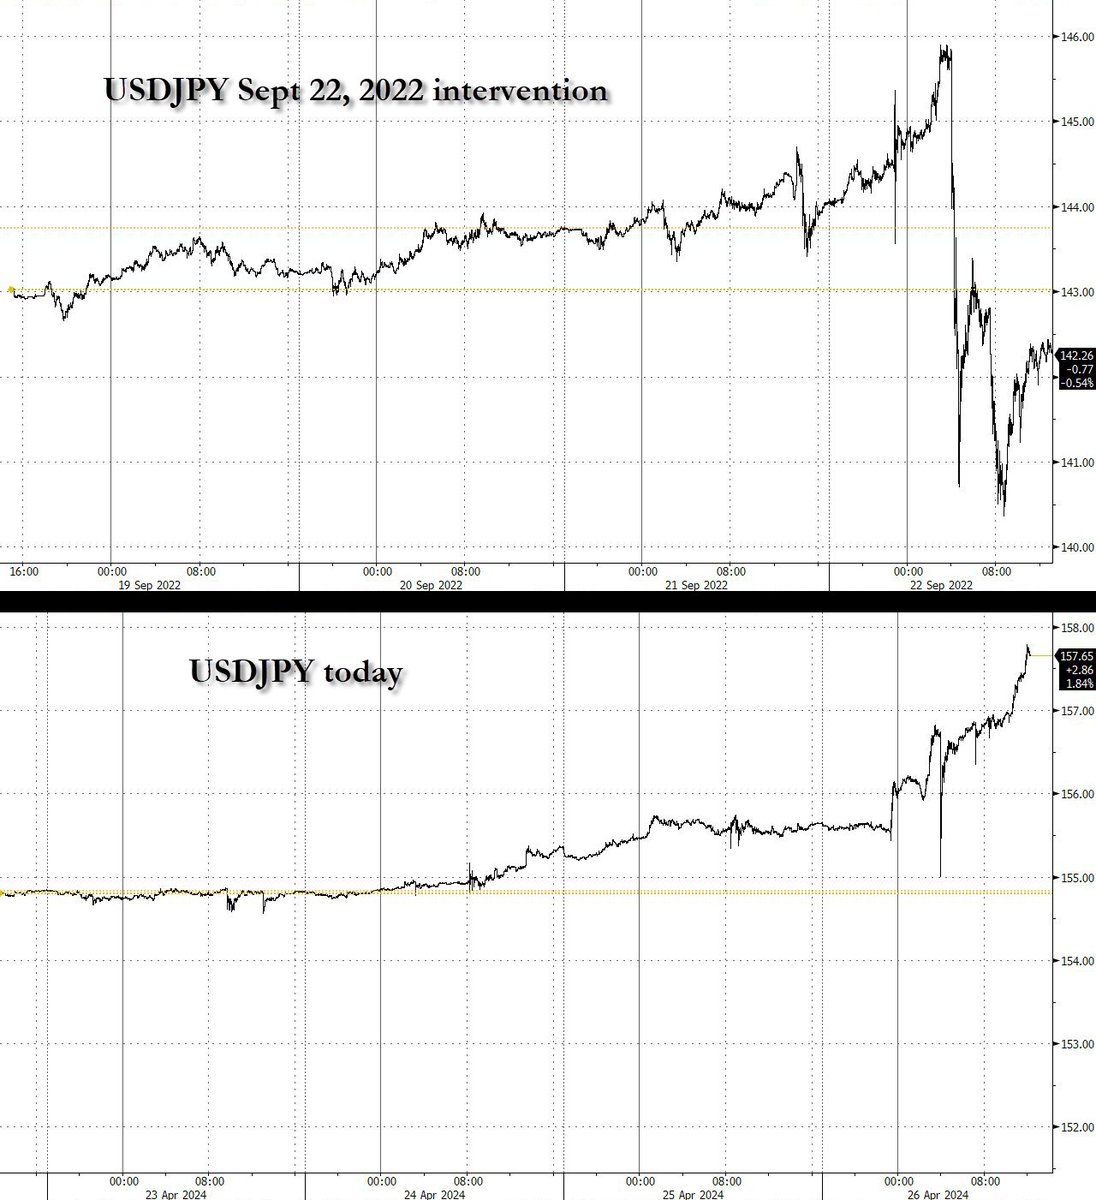 USDJPY during the Sept 22, 2022 intervention and today